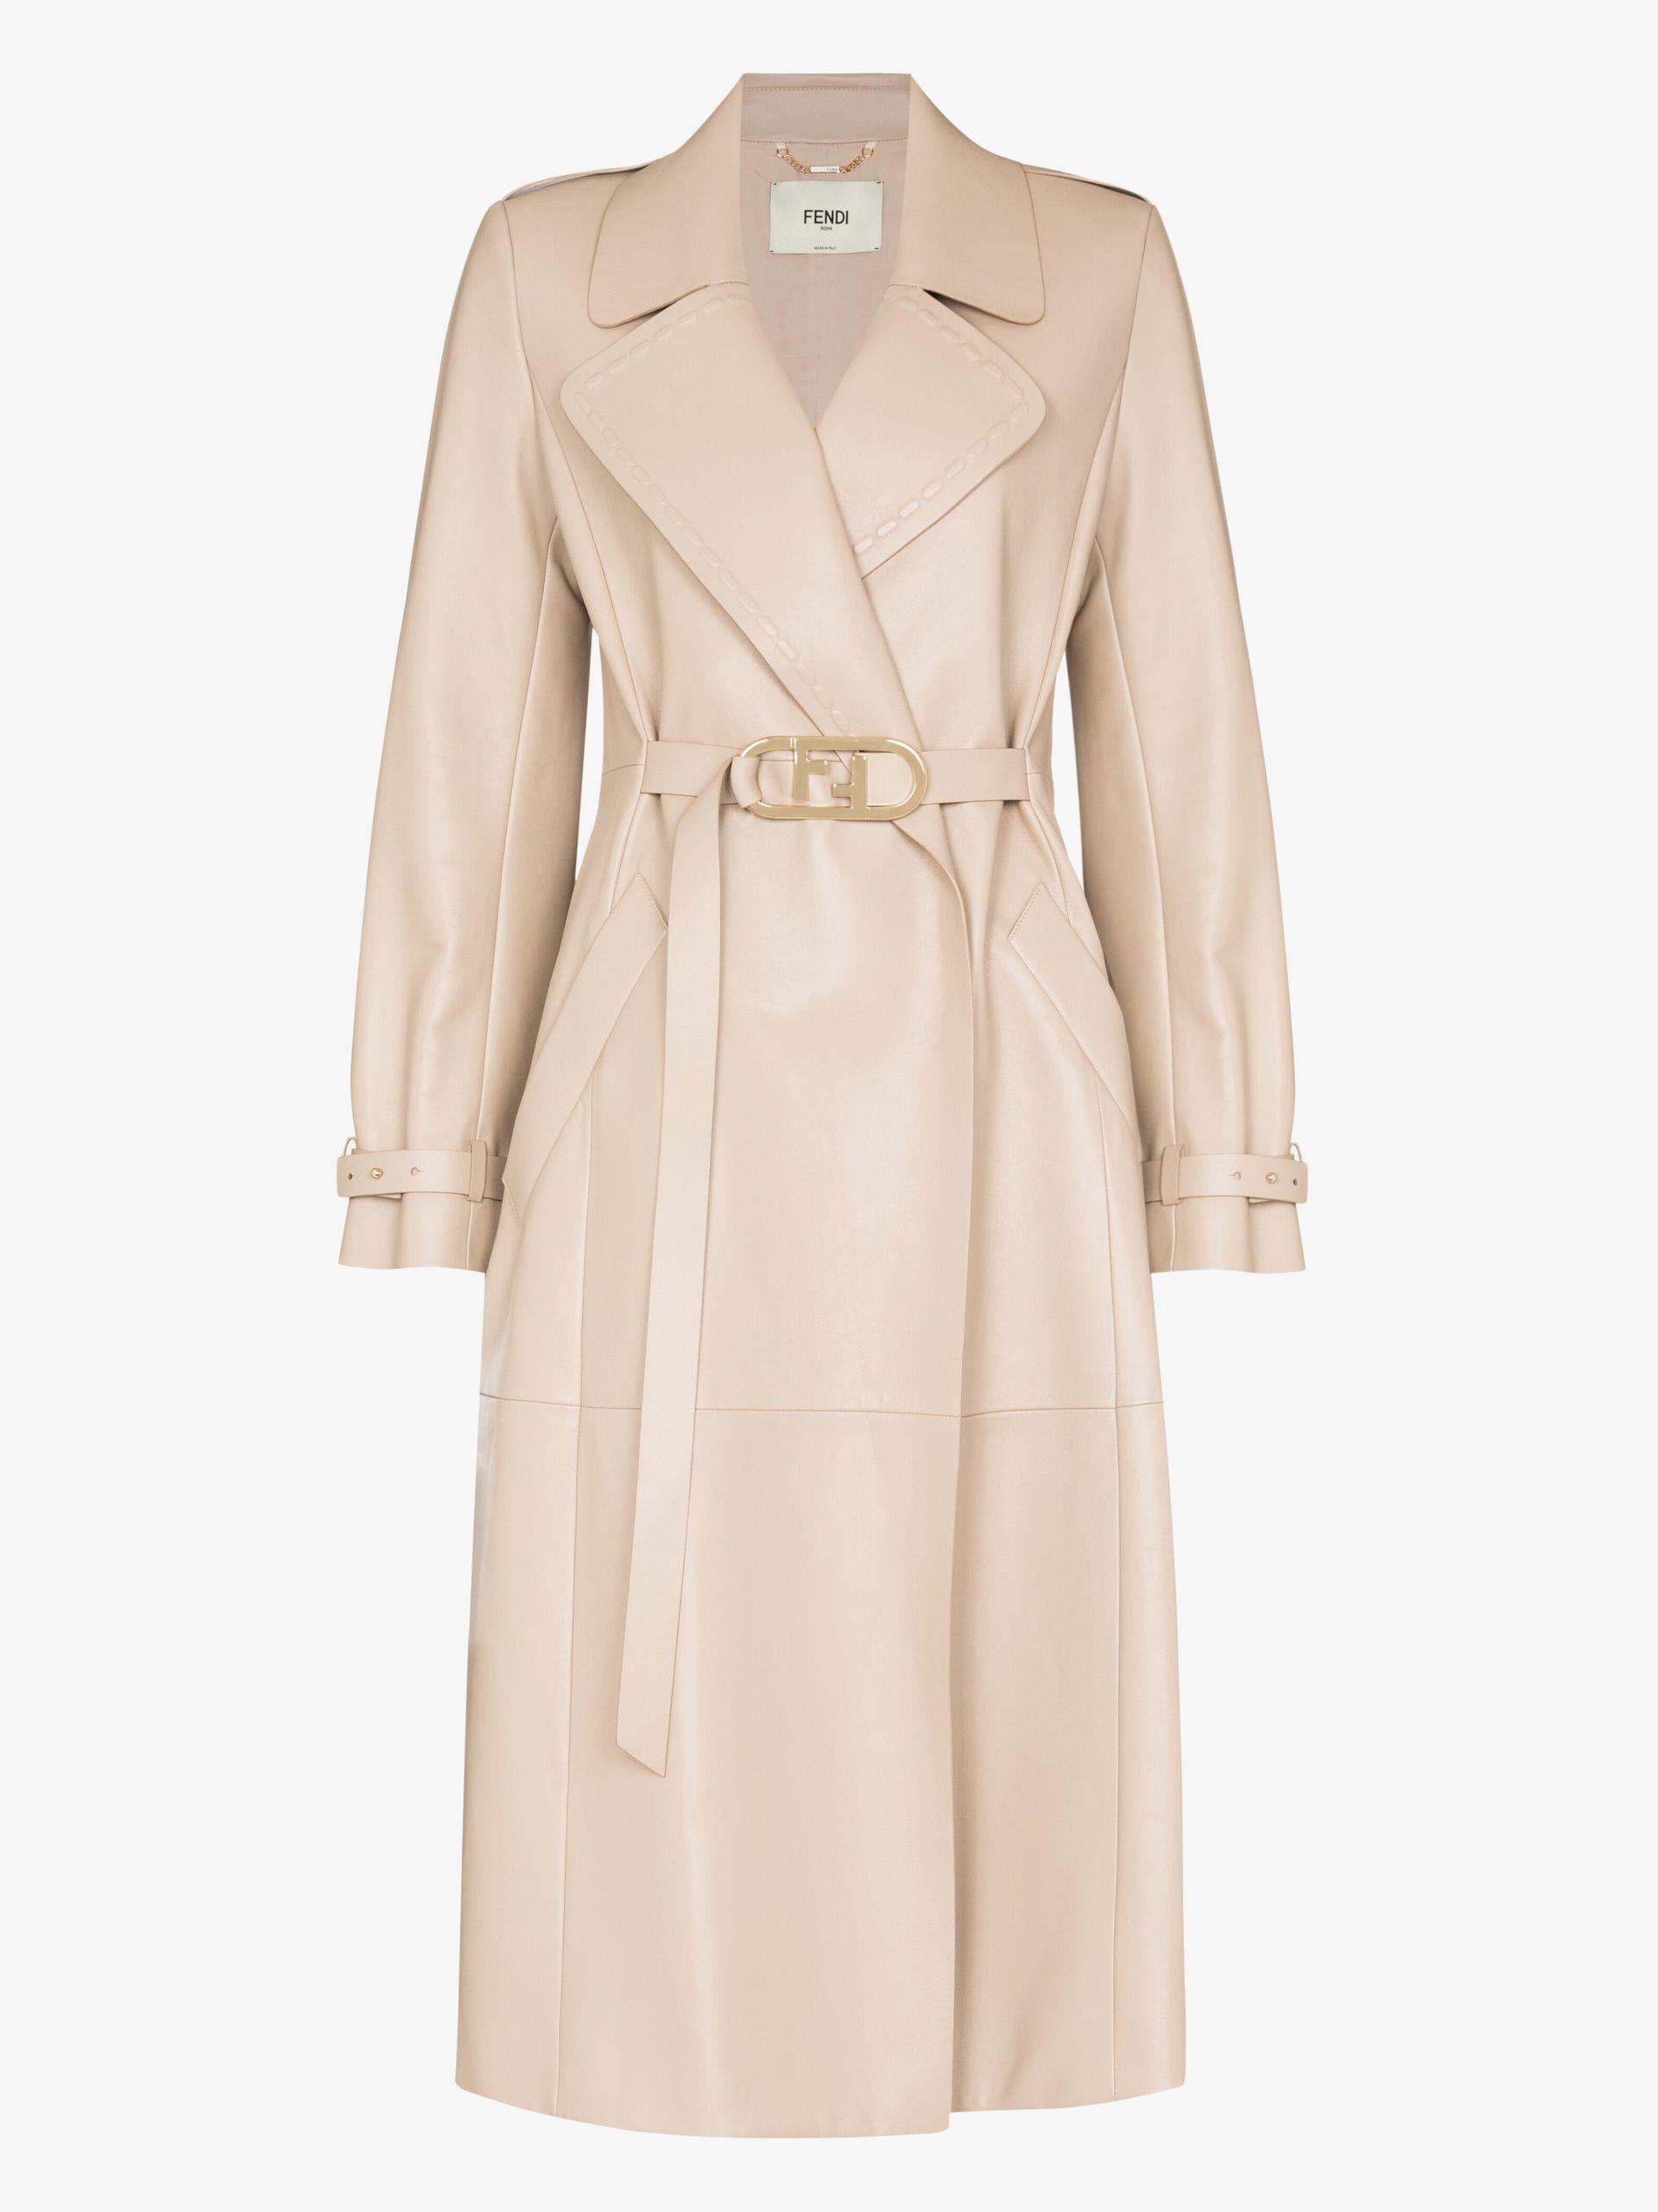 Men's Double-breasted Monogram Trench Coat by Fendi